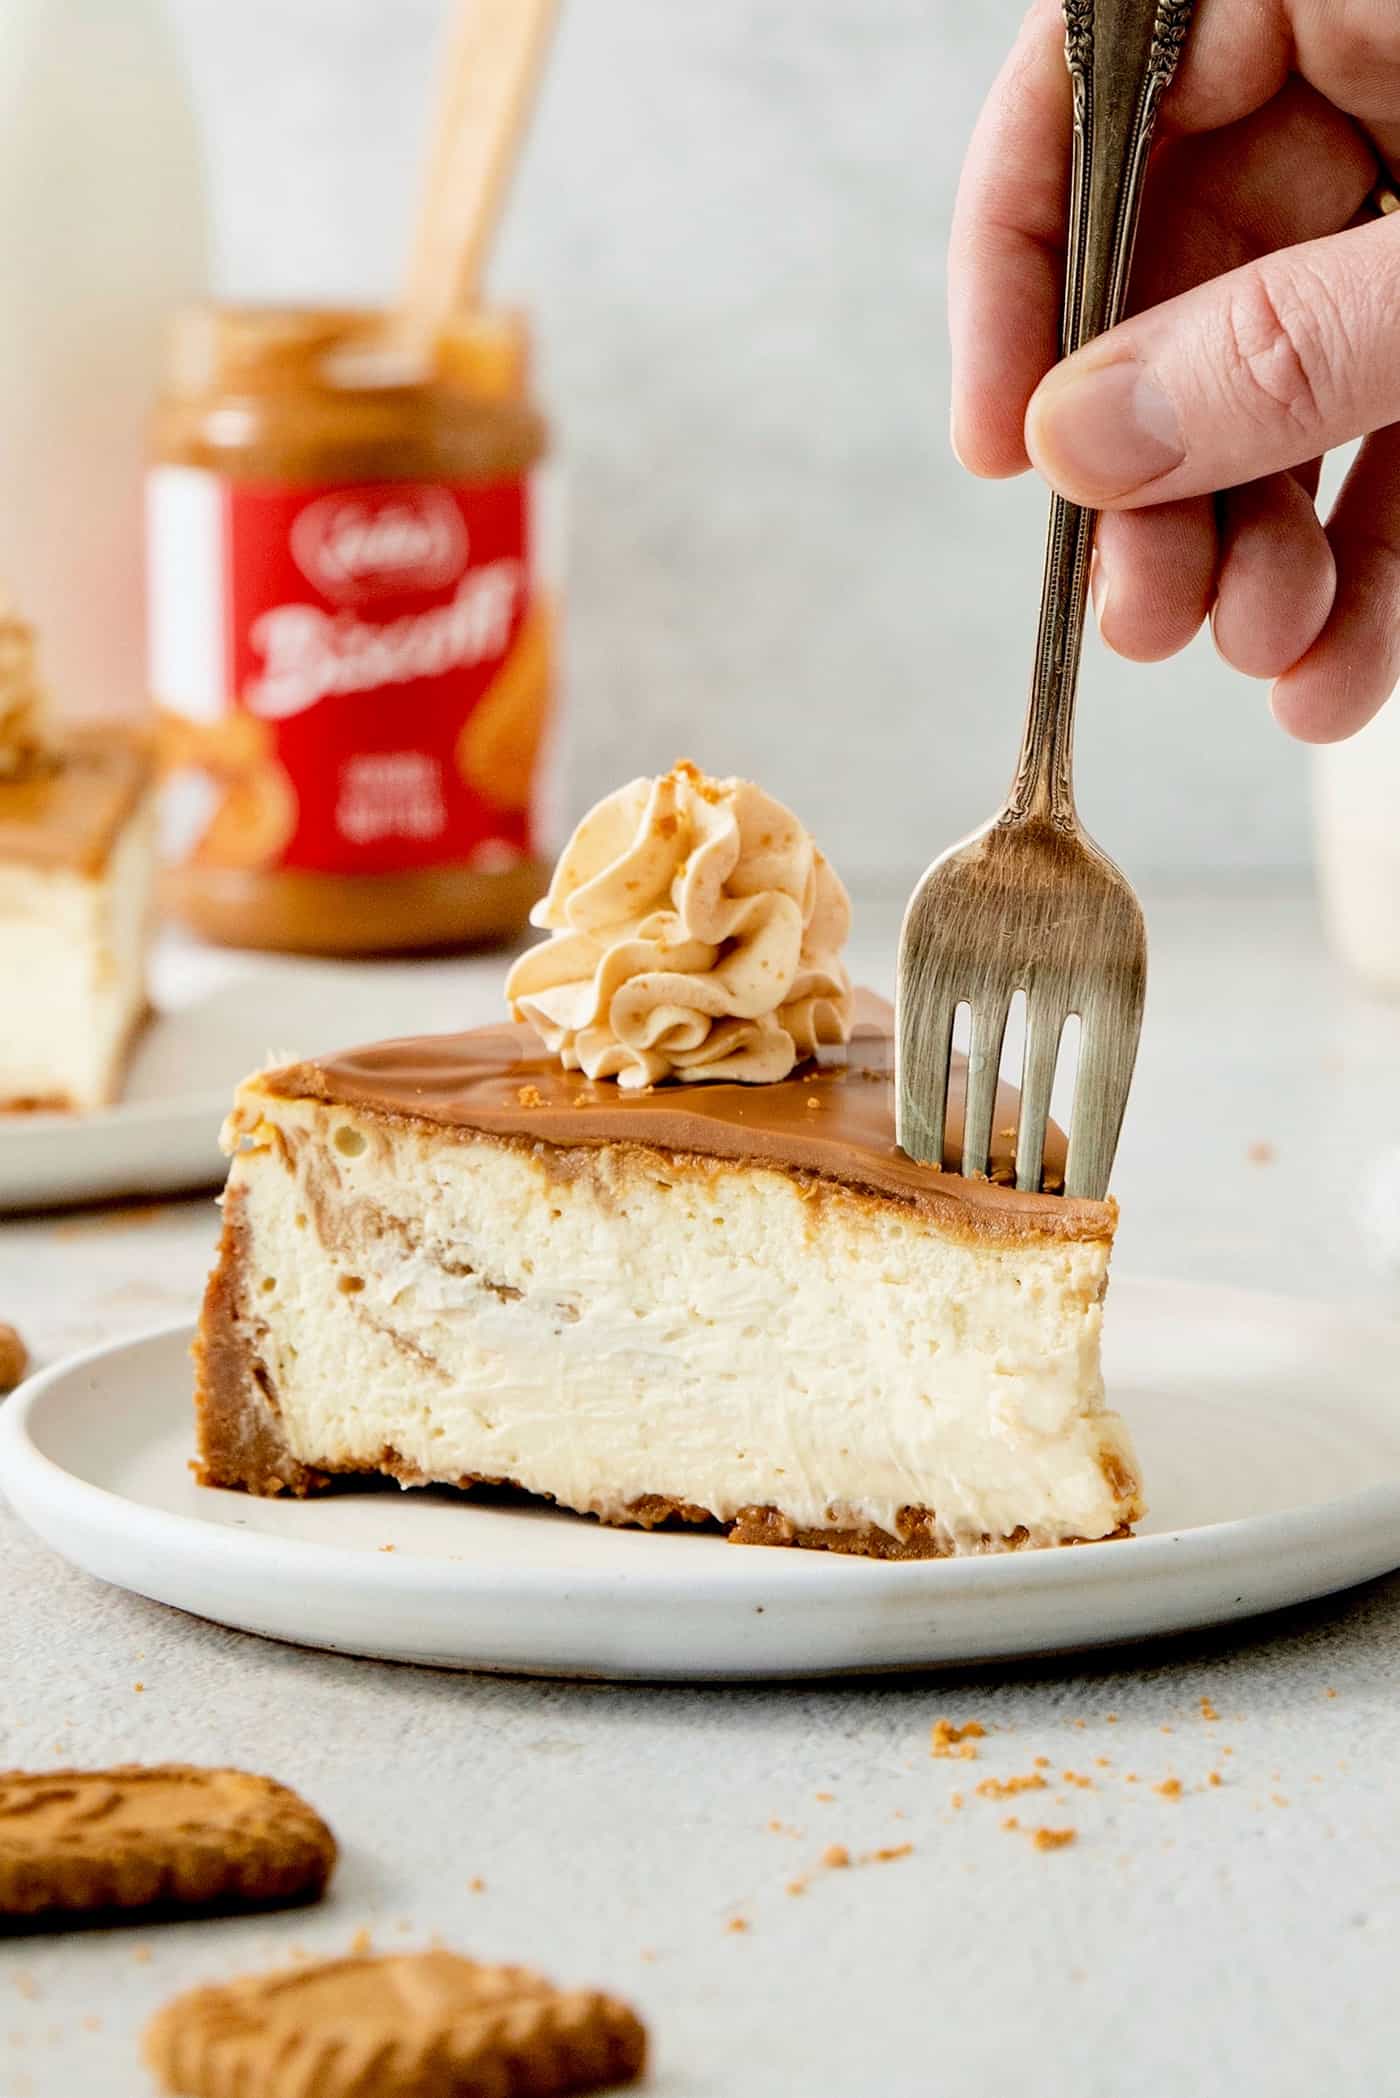 A fork cuts into a slice of biscoff cheesecake on a white plate.